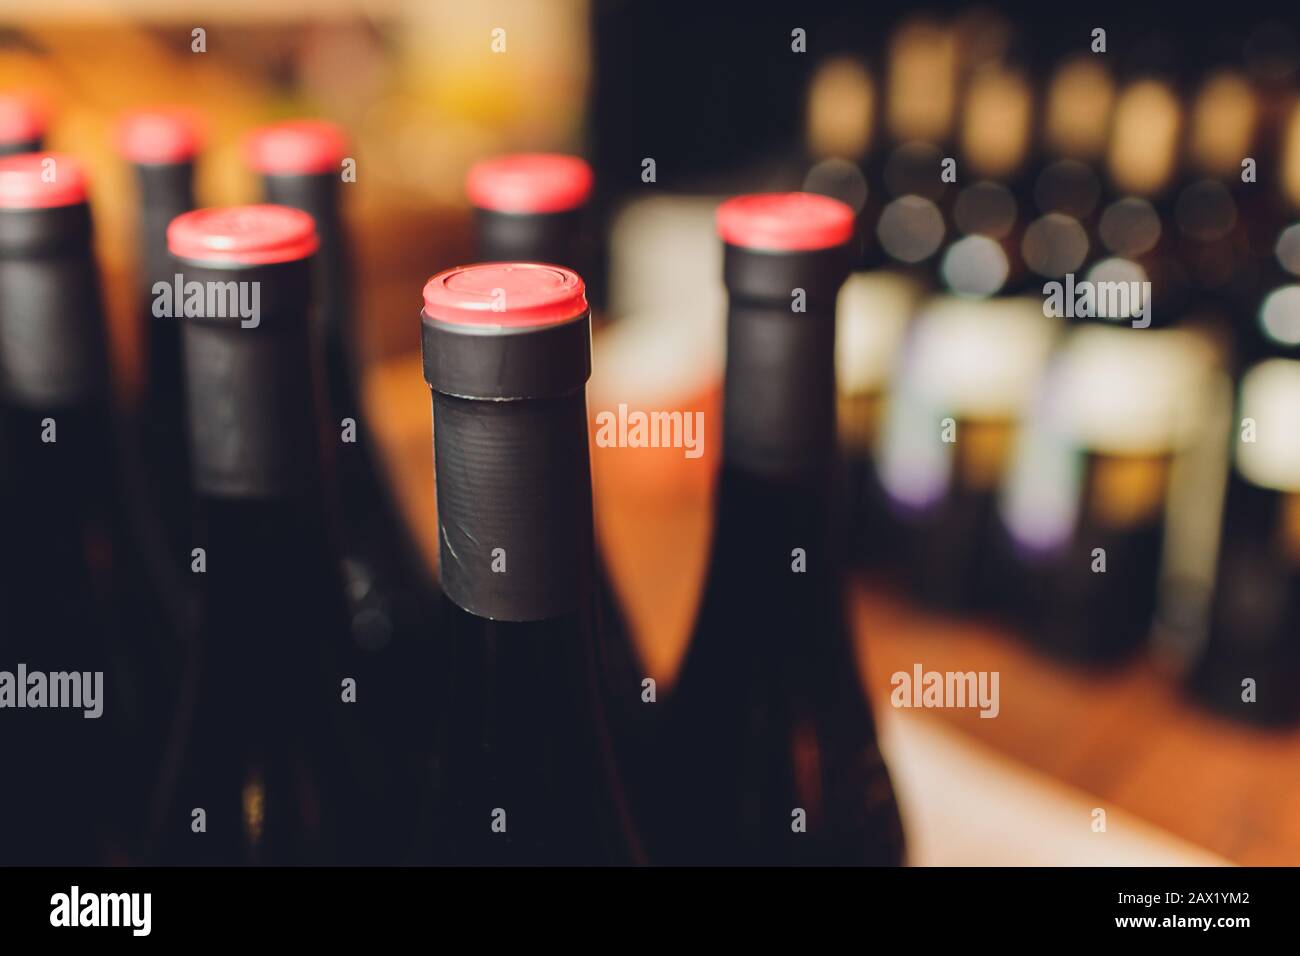 Closeup of full corked bottles of wine Stock Photo